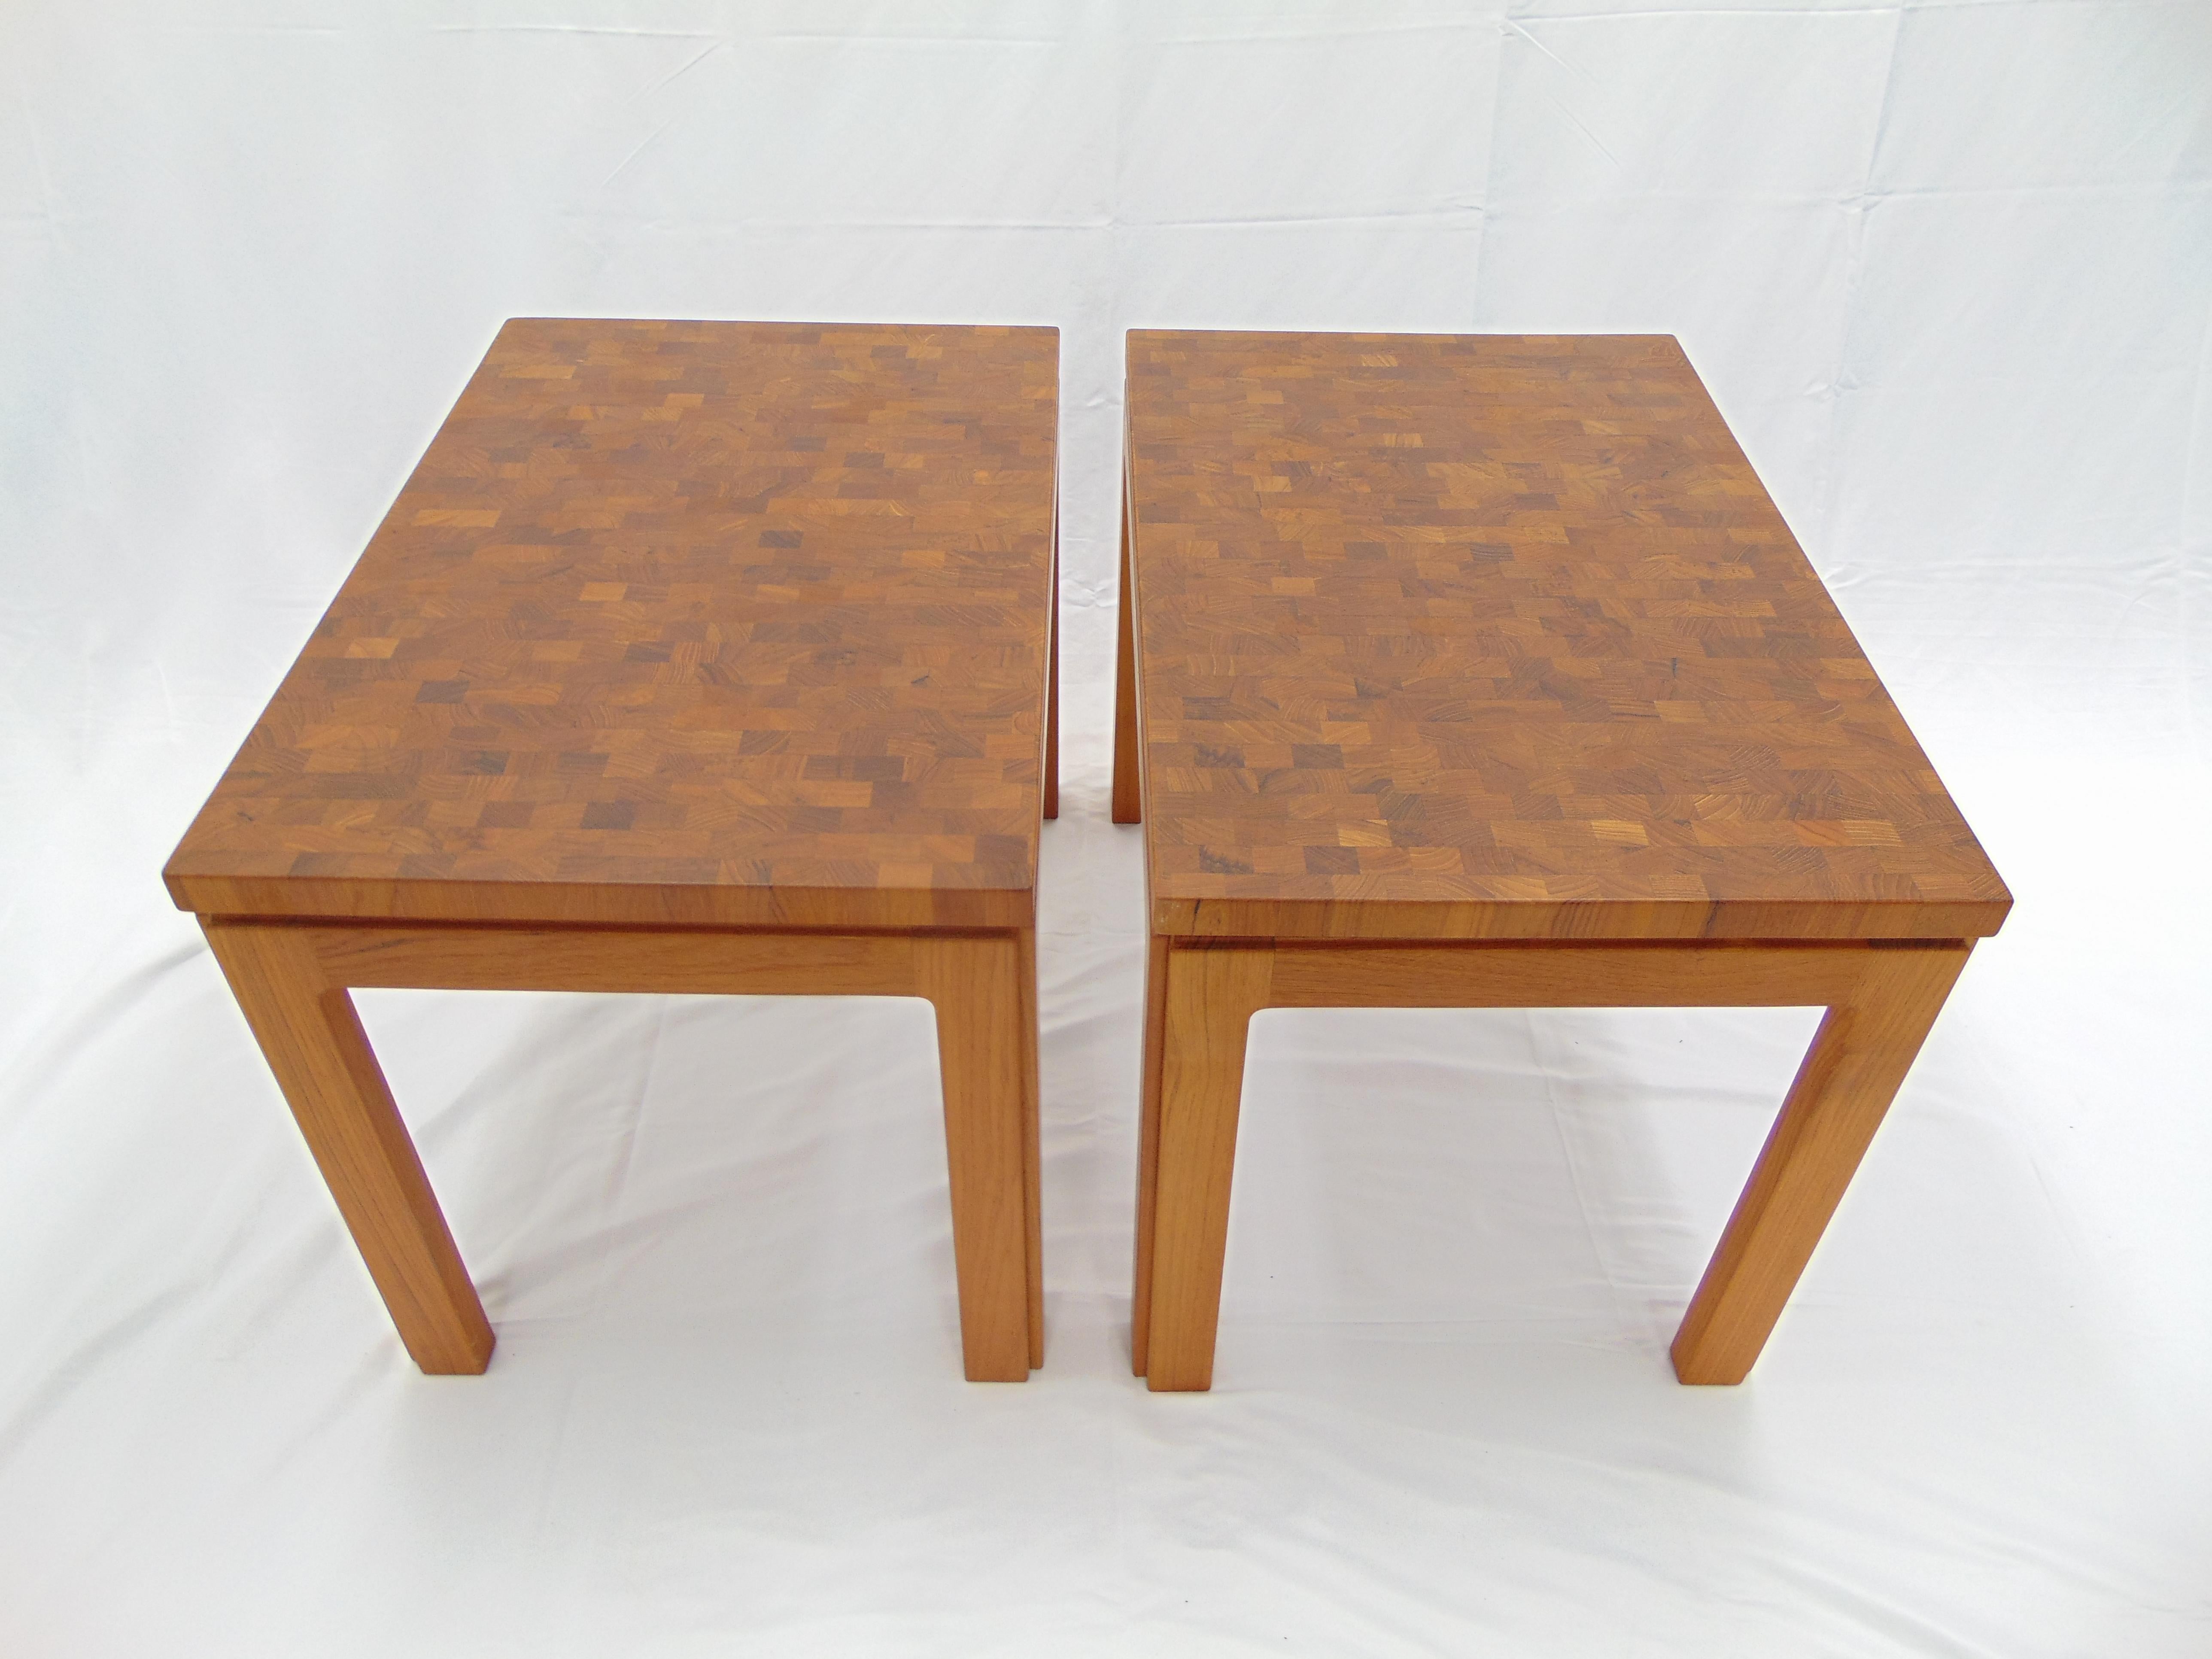 Beautiful Danish side tables by Tarm Stole. They are made of teak wood. They are in excellent condition. The dimensions are: 19” W x 28” L x 20.75” H.  Selling individually, both are available.  